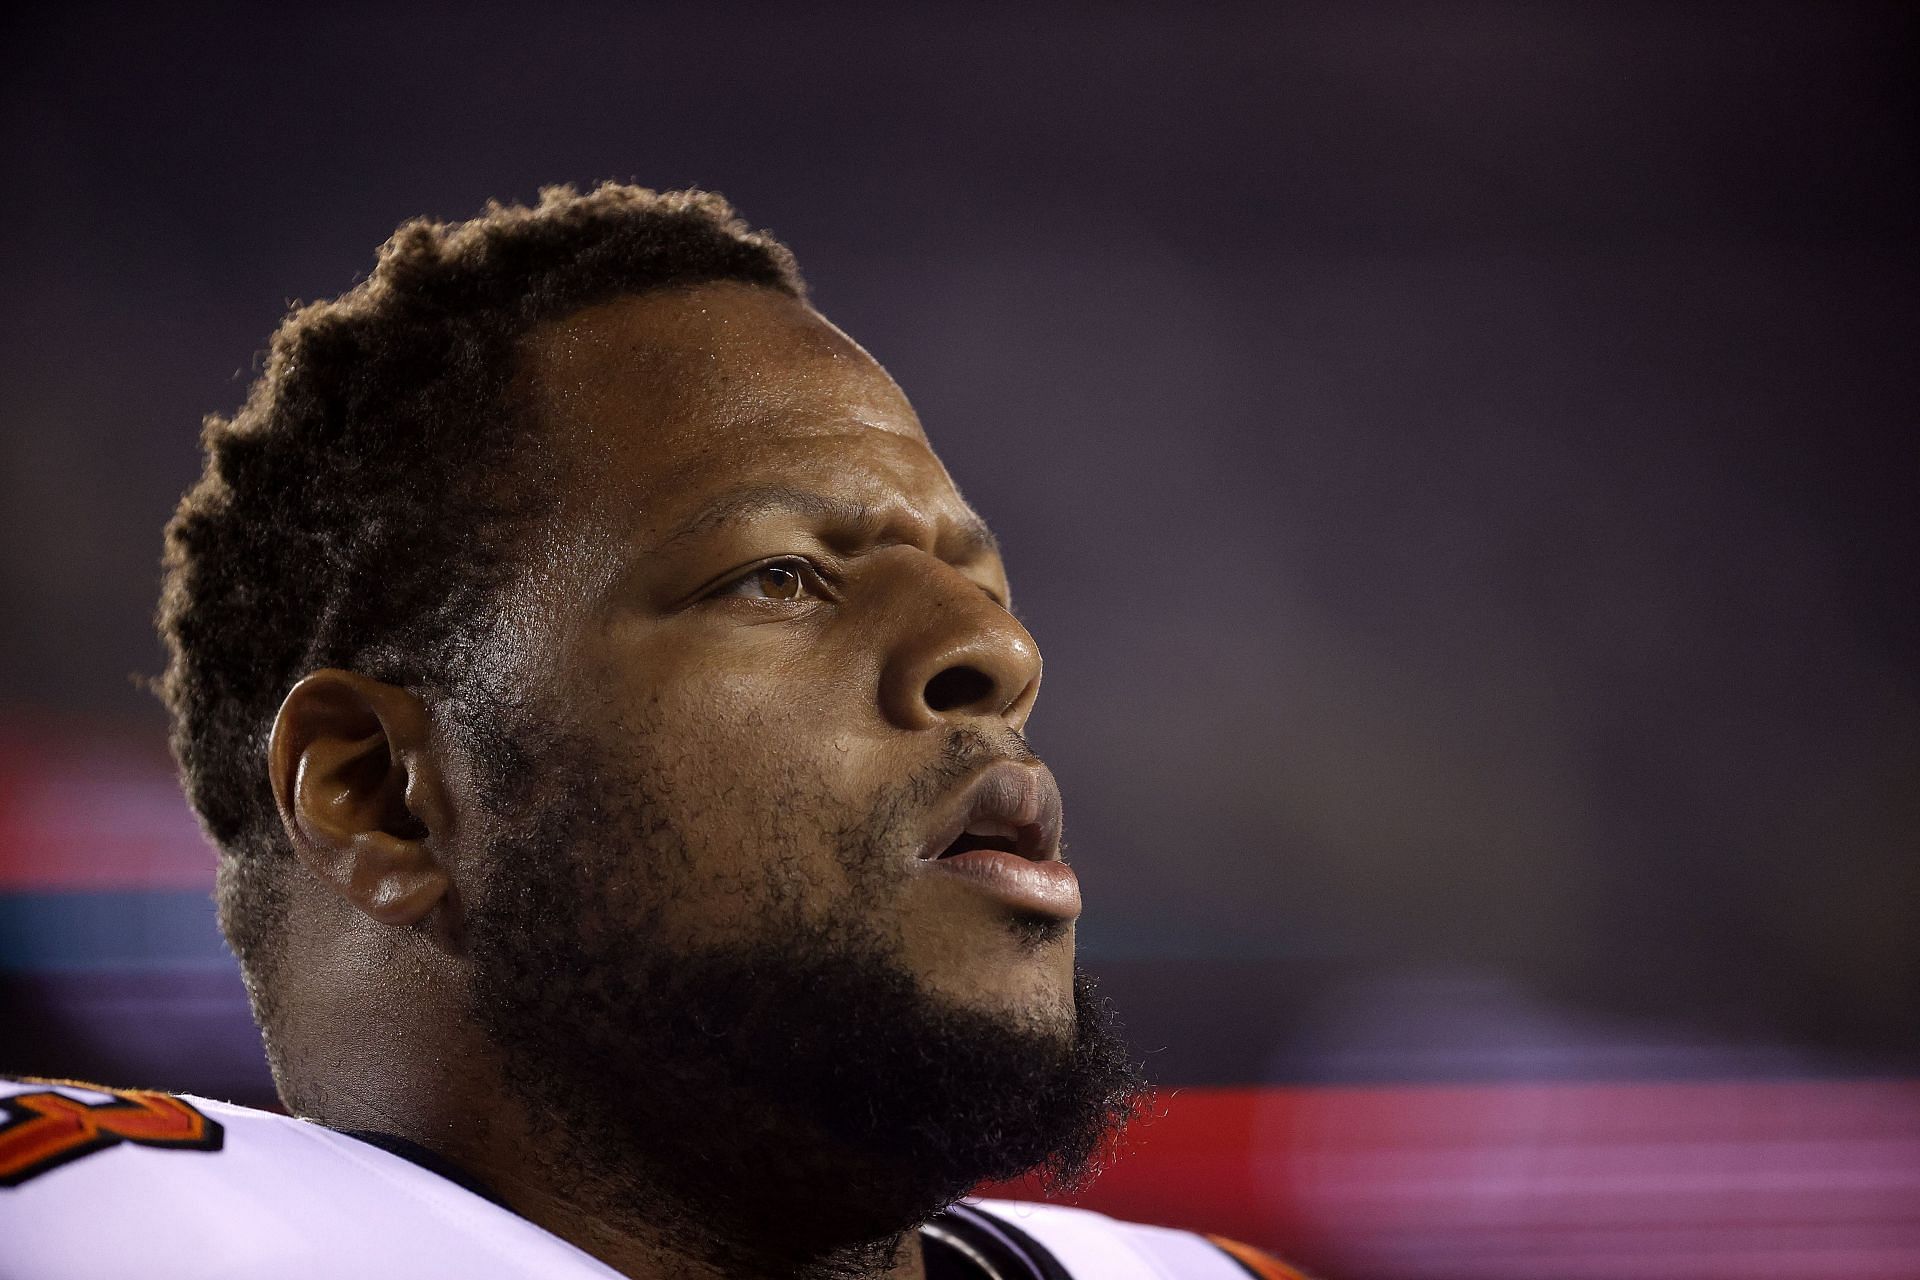 Ndamukong Suh Eagles' latest target for reinforcements after Linval Joseph